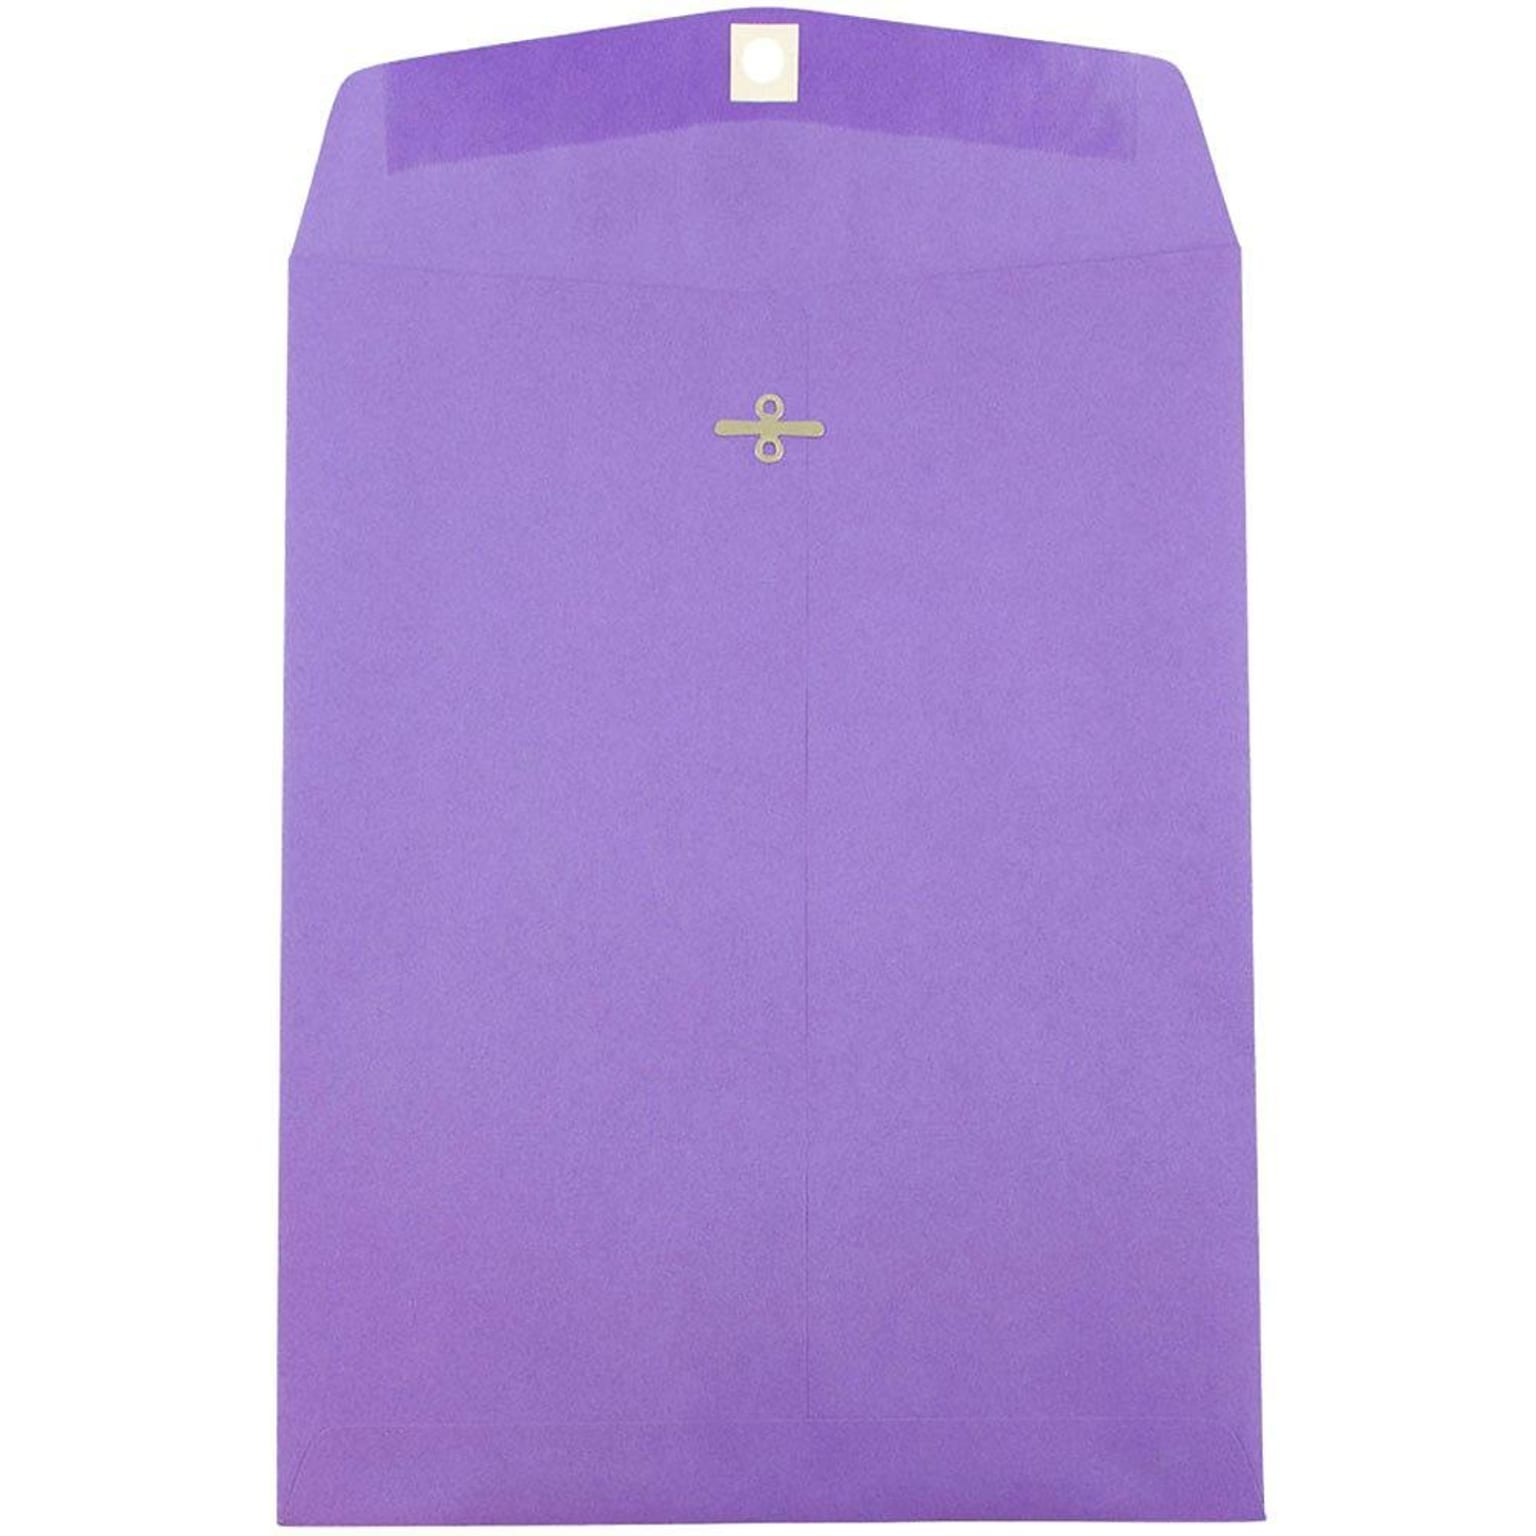 JAM Paper 10 x 13 Open End Catalog Colored Envelopes with Clasp Closure, Violet Purple Recycled, 10/Pack (V0128182B)